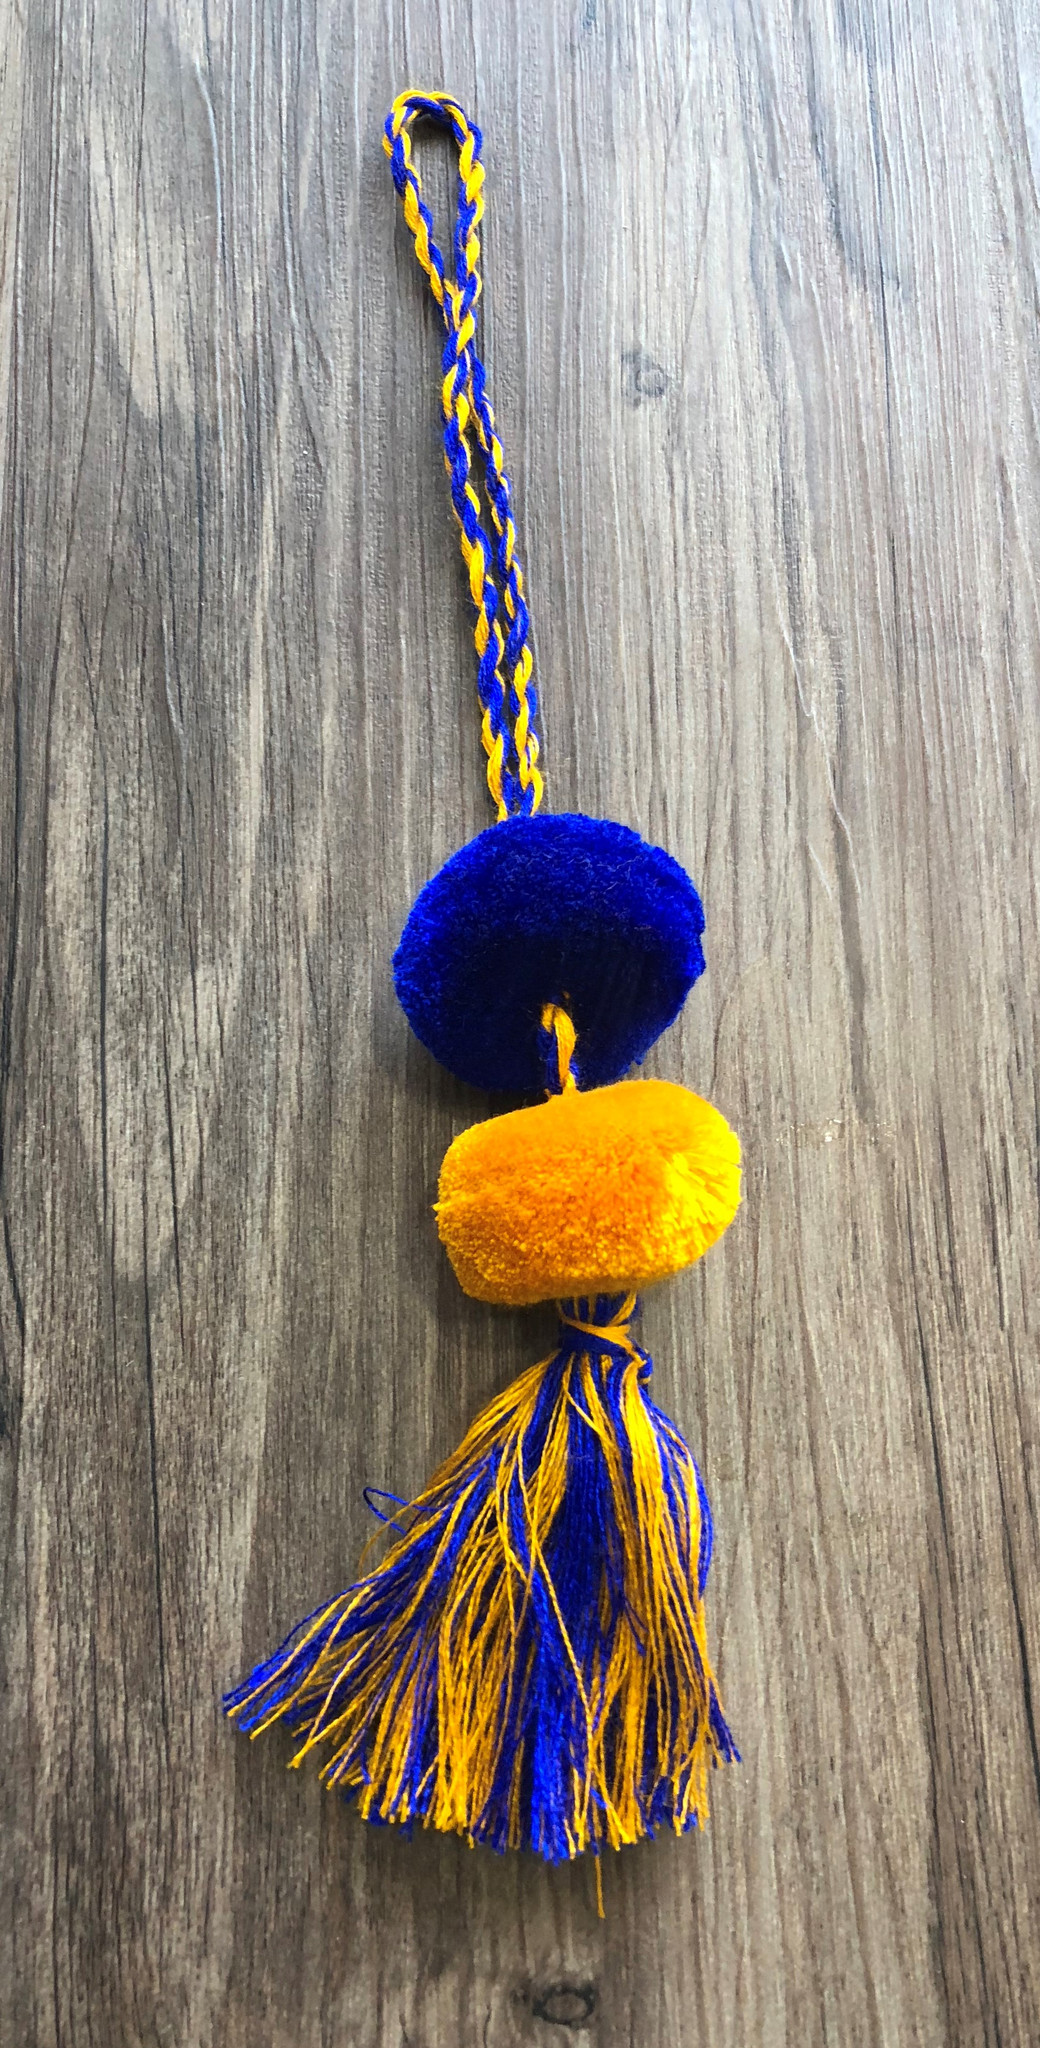 Mayan Arts Pom Pom Tassel, Charming Small Pom Poms Women's Fashion Hand  Bags or Home Accent Decor Accessories, Handmade in Guatemala